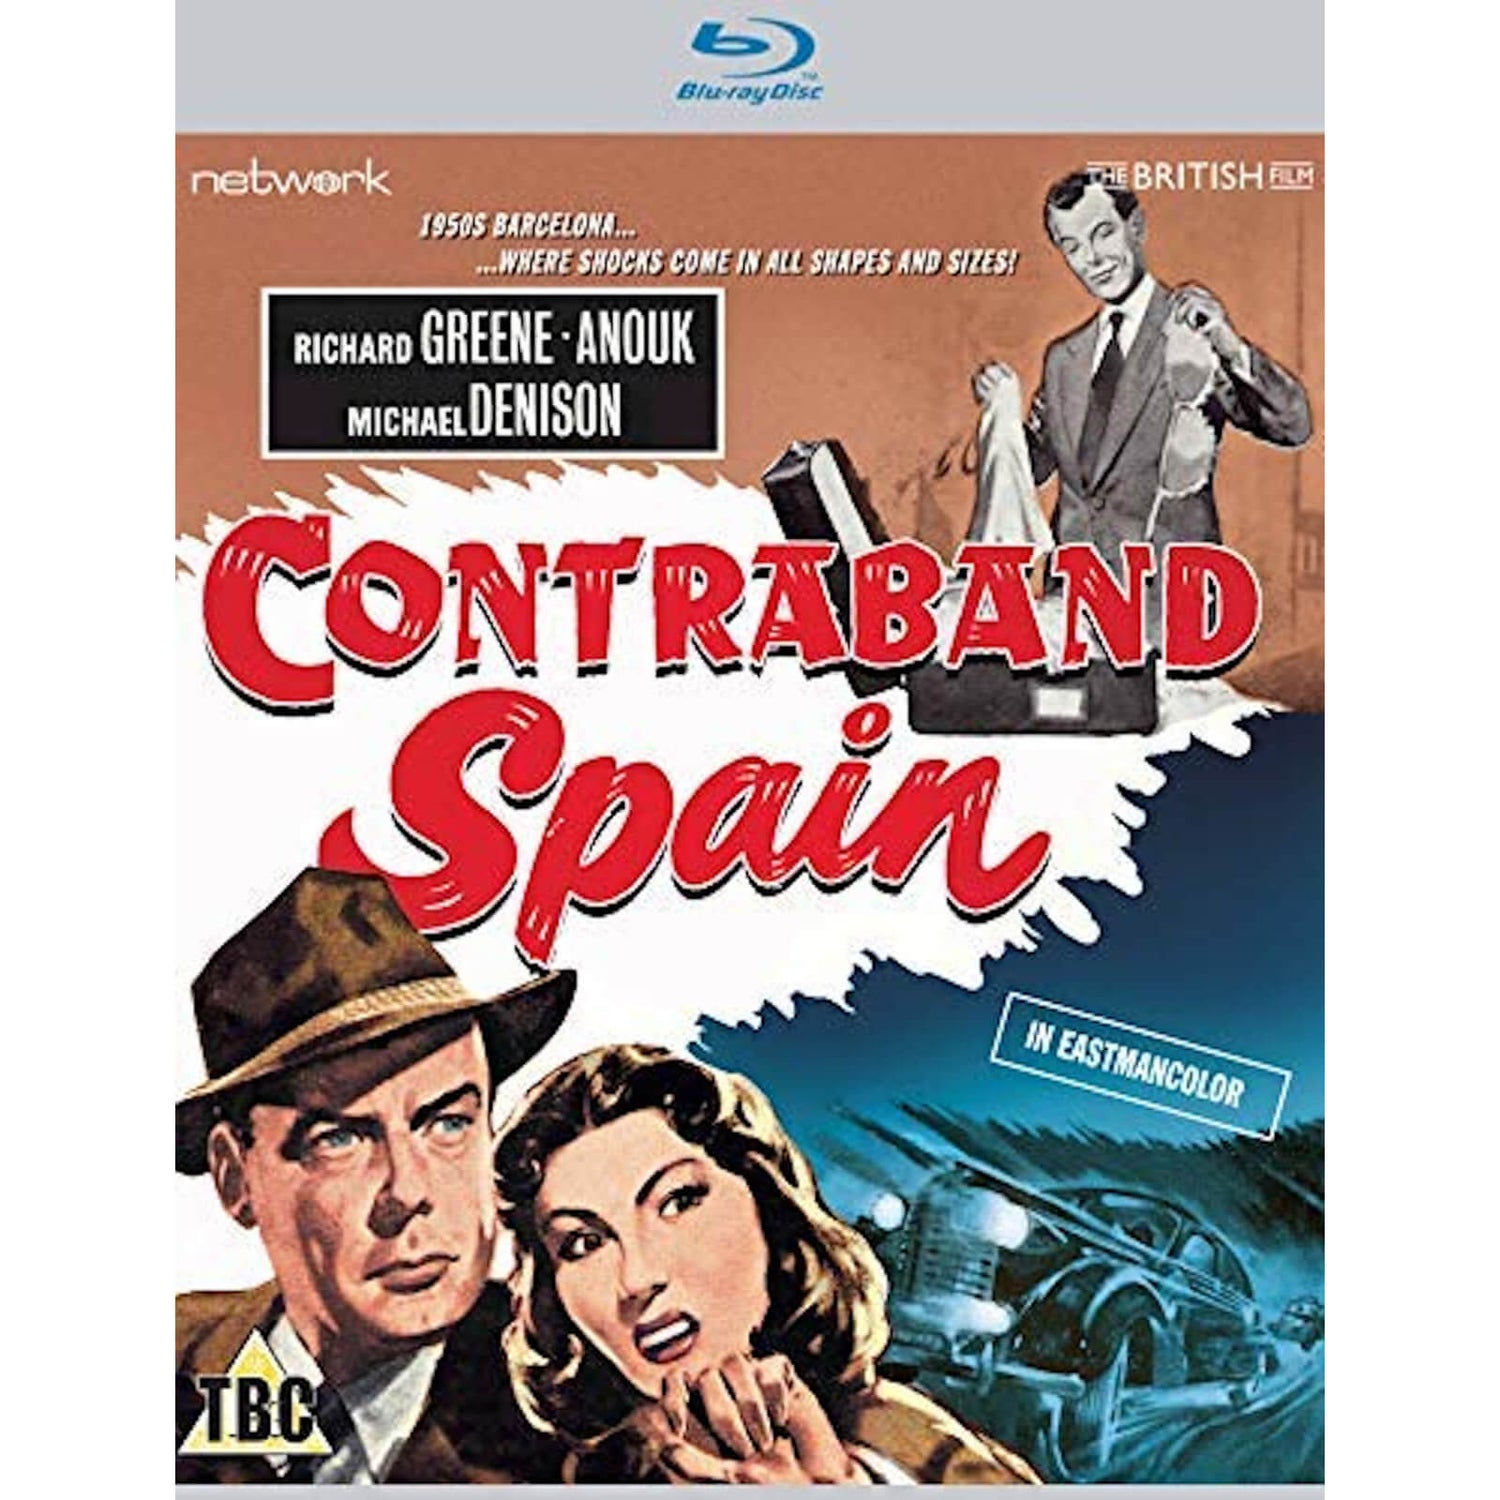 Contraband Spain